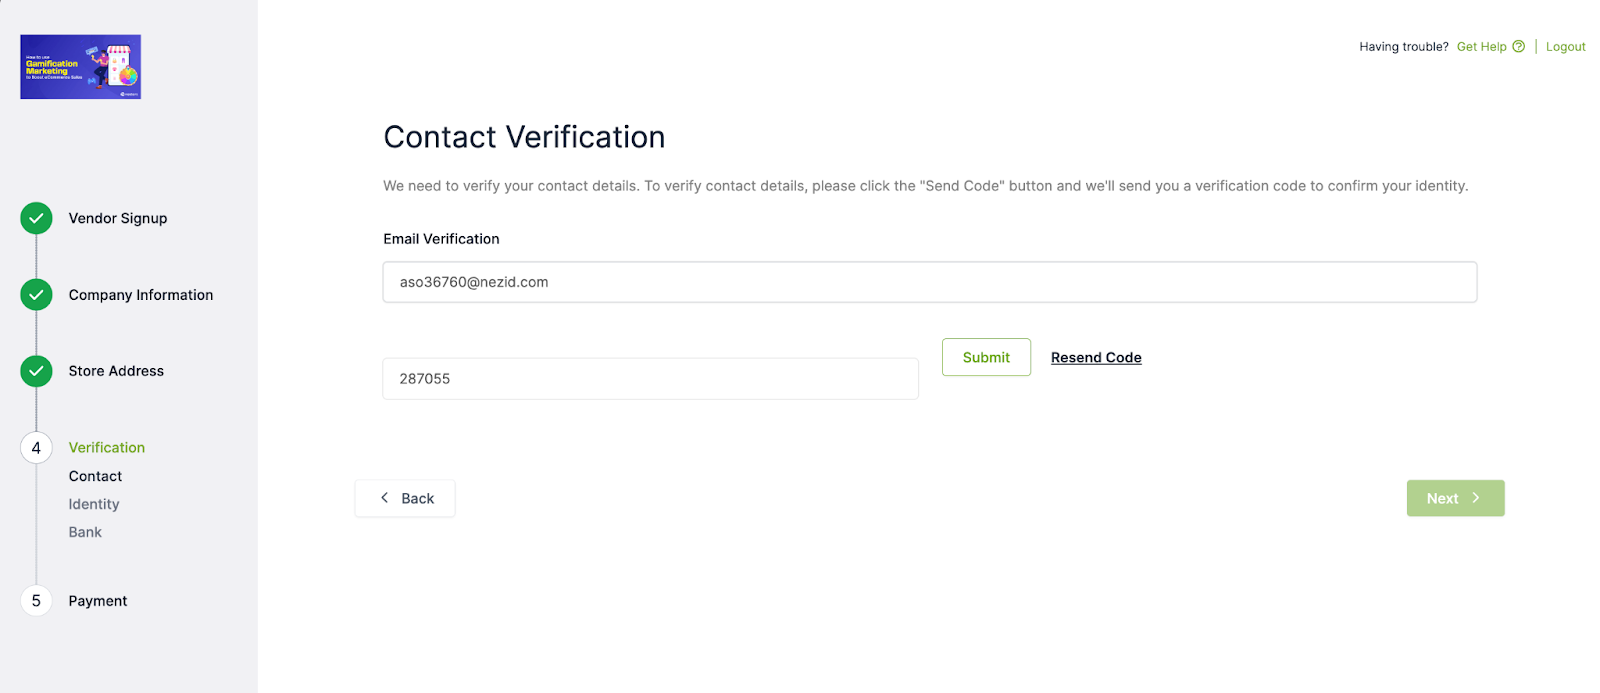 This screenshot shows the Contact Verification form 